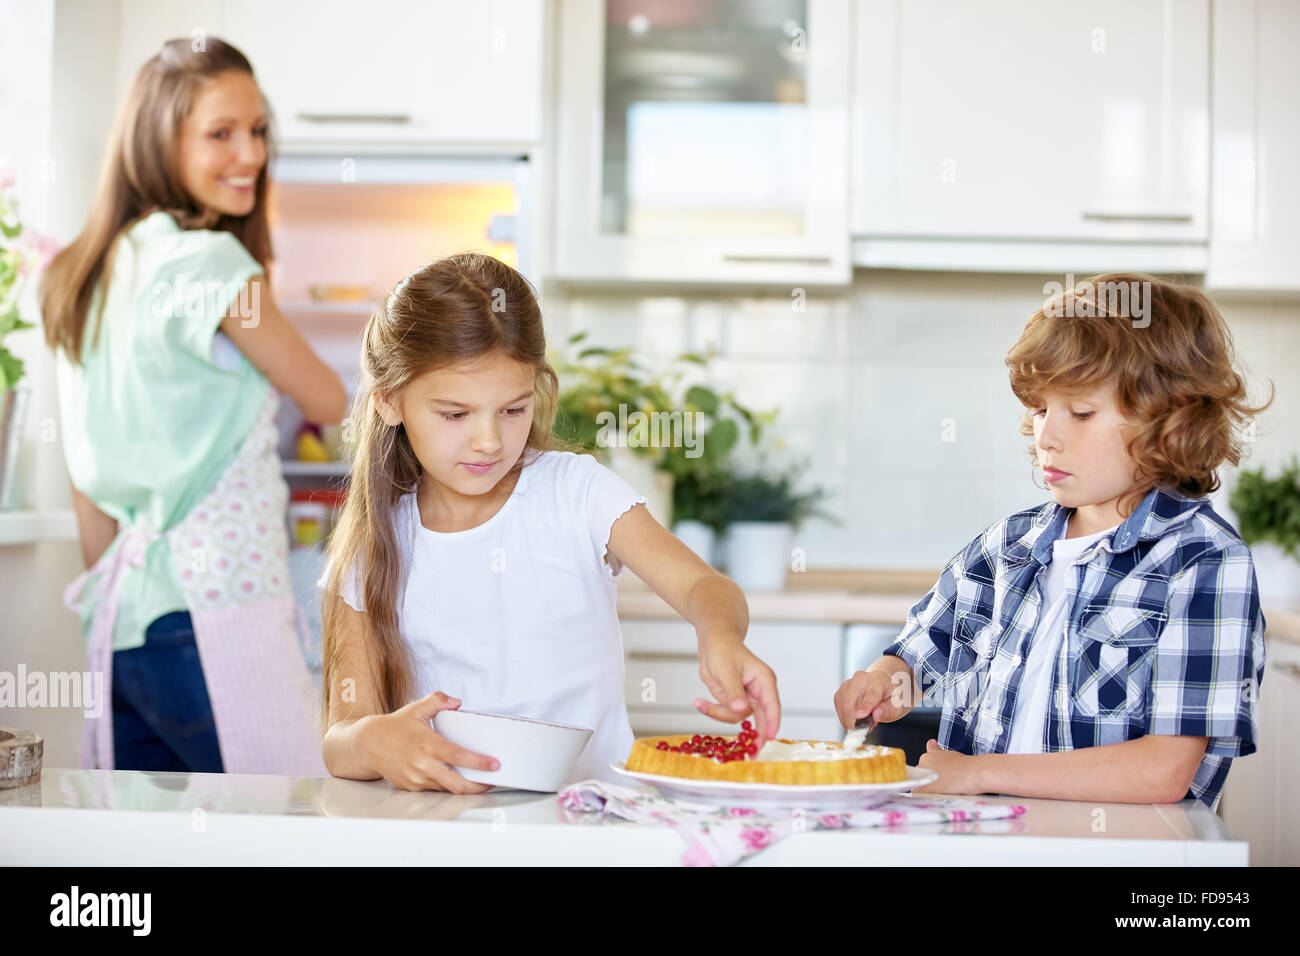 Children baking fruitcake with red currants in the kitchen Stock Photo